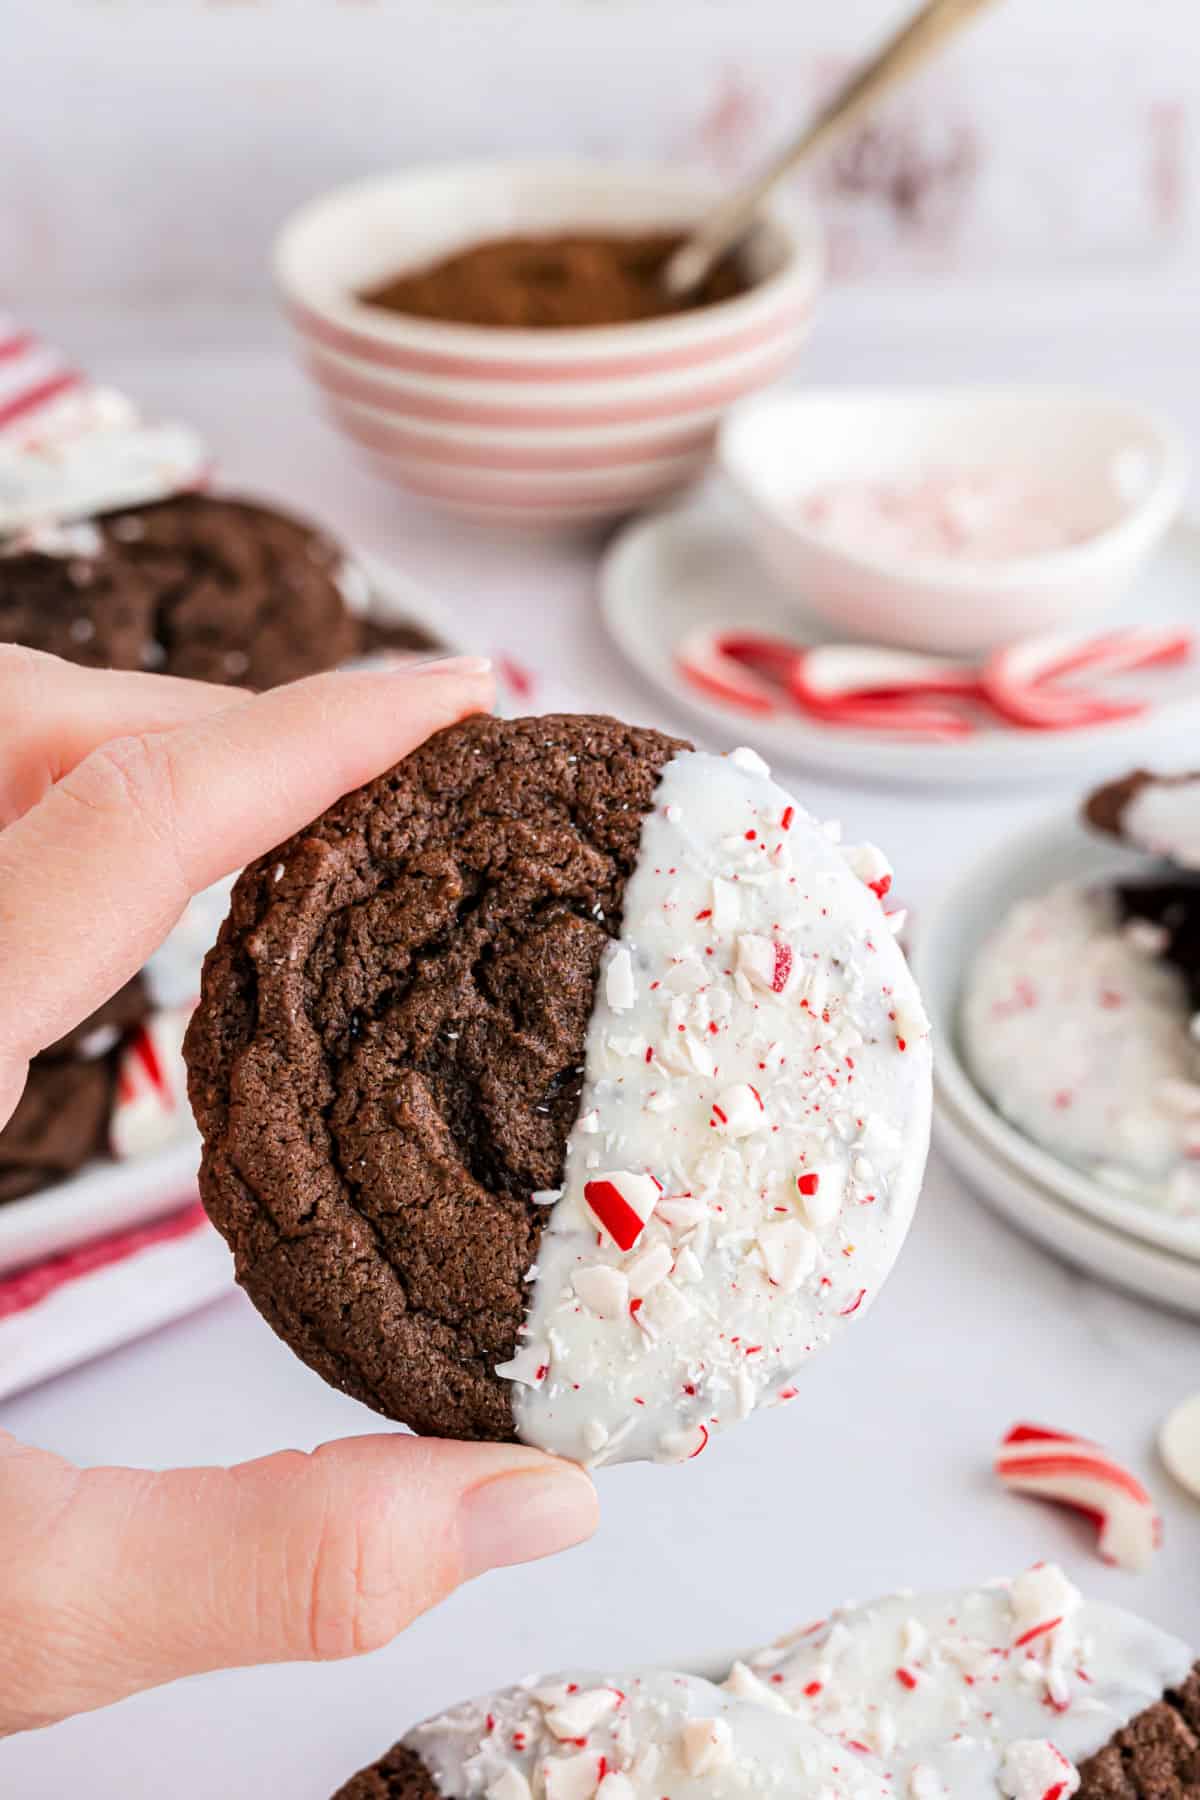 Chocolate cookie with peppermint and white chocolate being held.